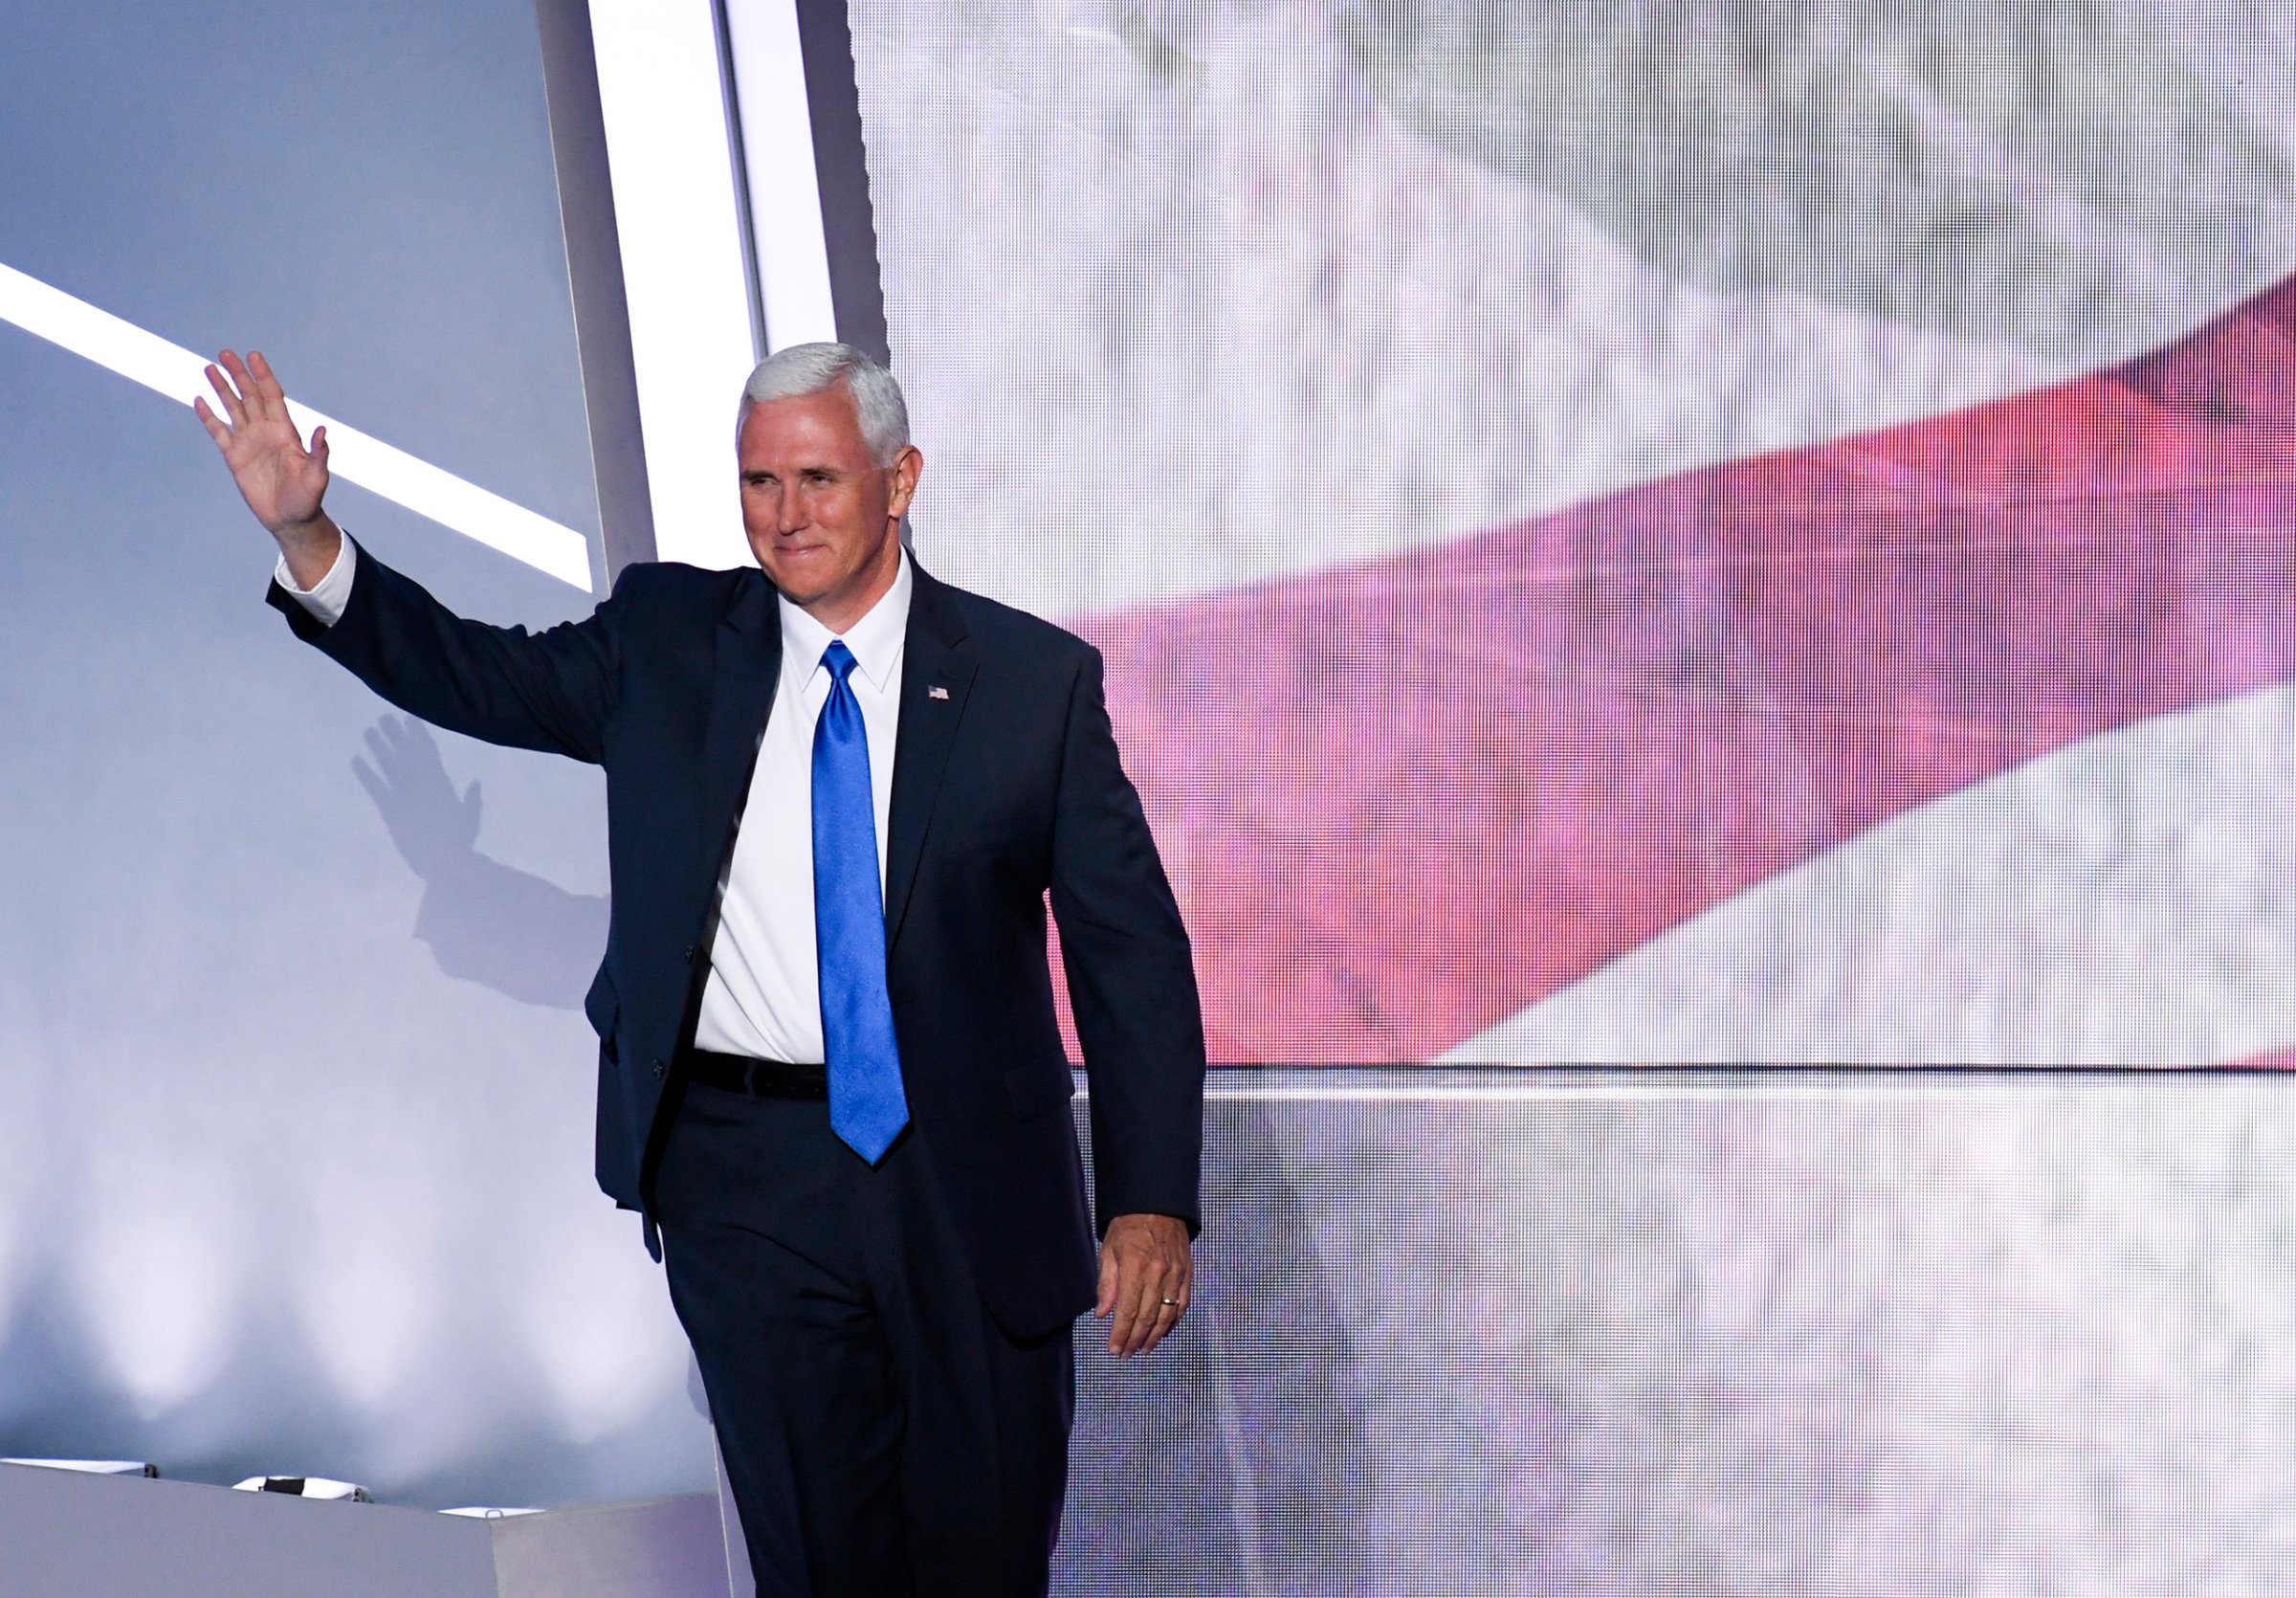 Indiana Gov. Mike Pence, and Vice Presidential nominee, takes the stage to speak at the 2016 Republican National Convention in Cleveland on July 20, 2016.